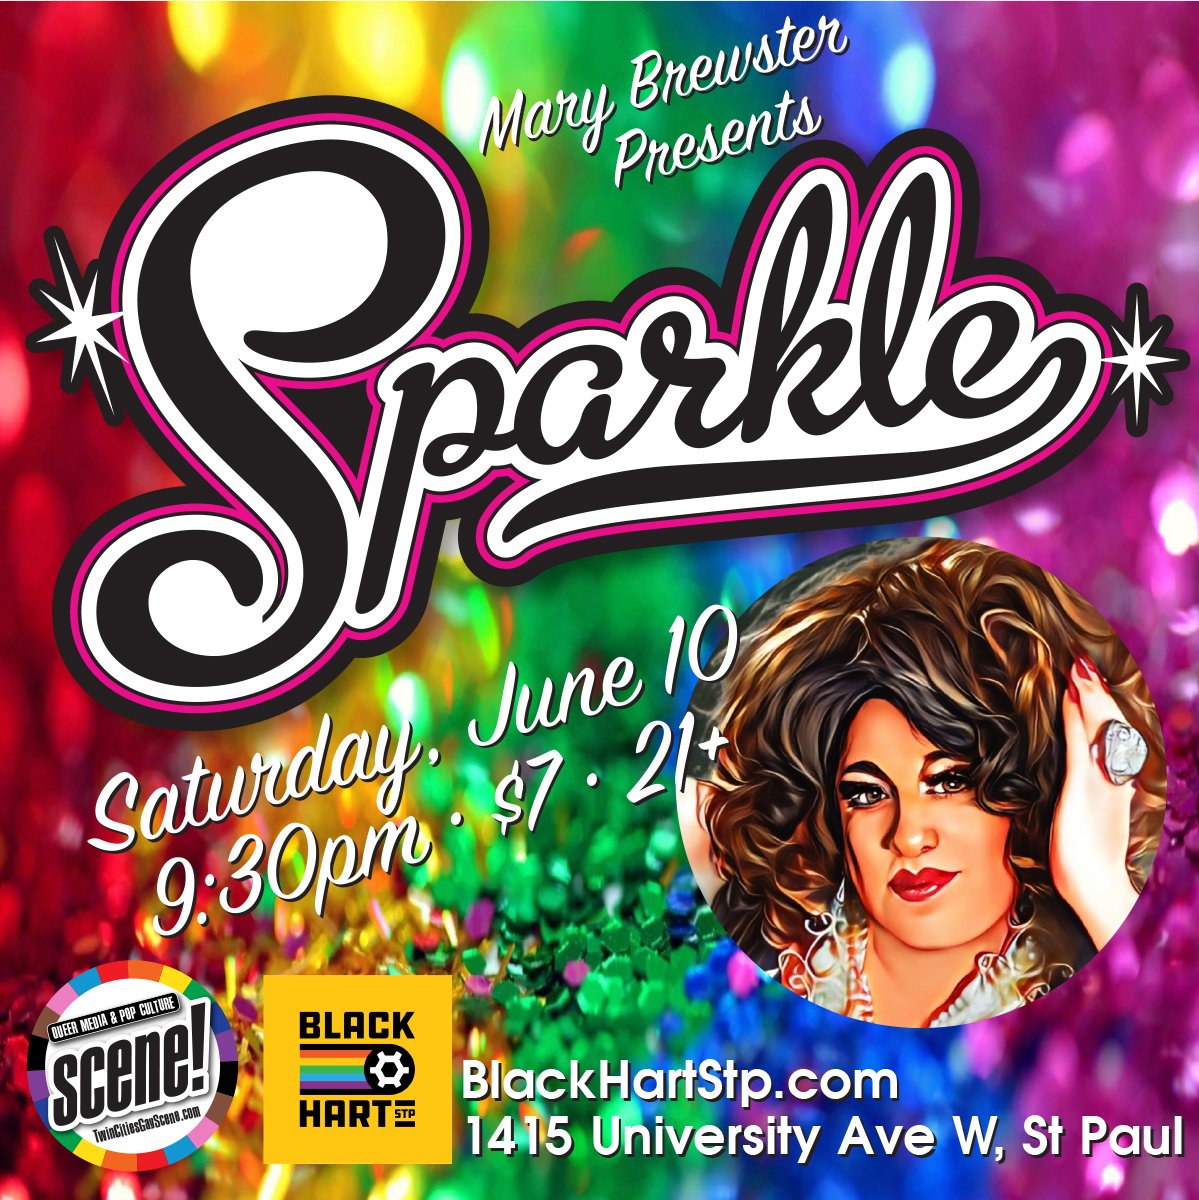 #sparkle at the @BlackHartSTP THIS Saturday night! Join us and BE PROUD!